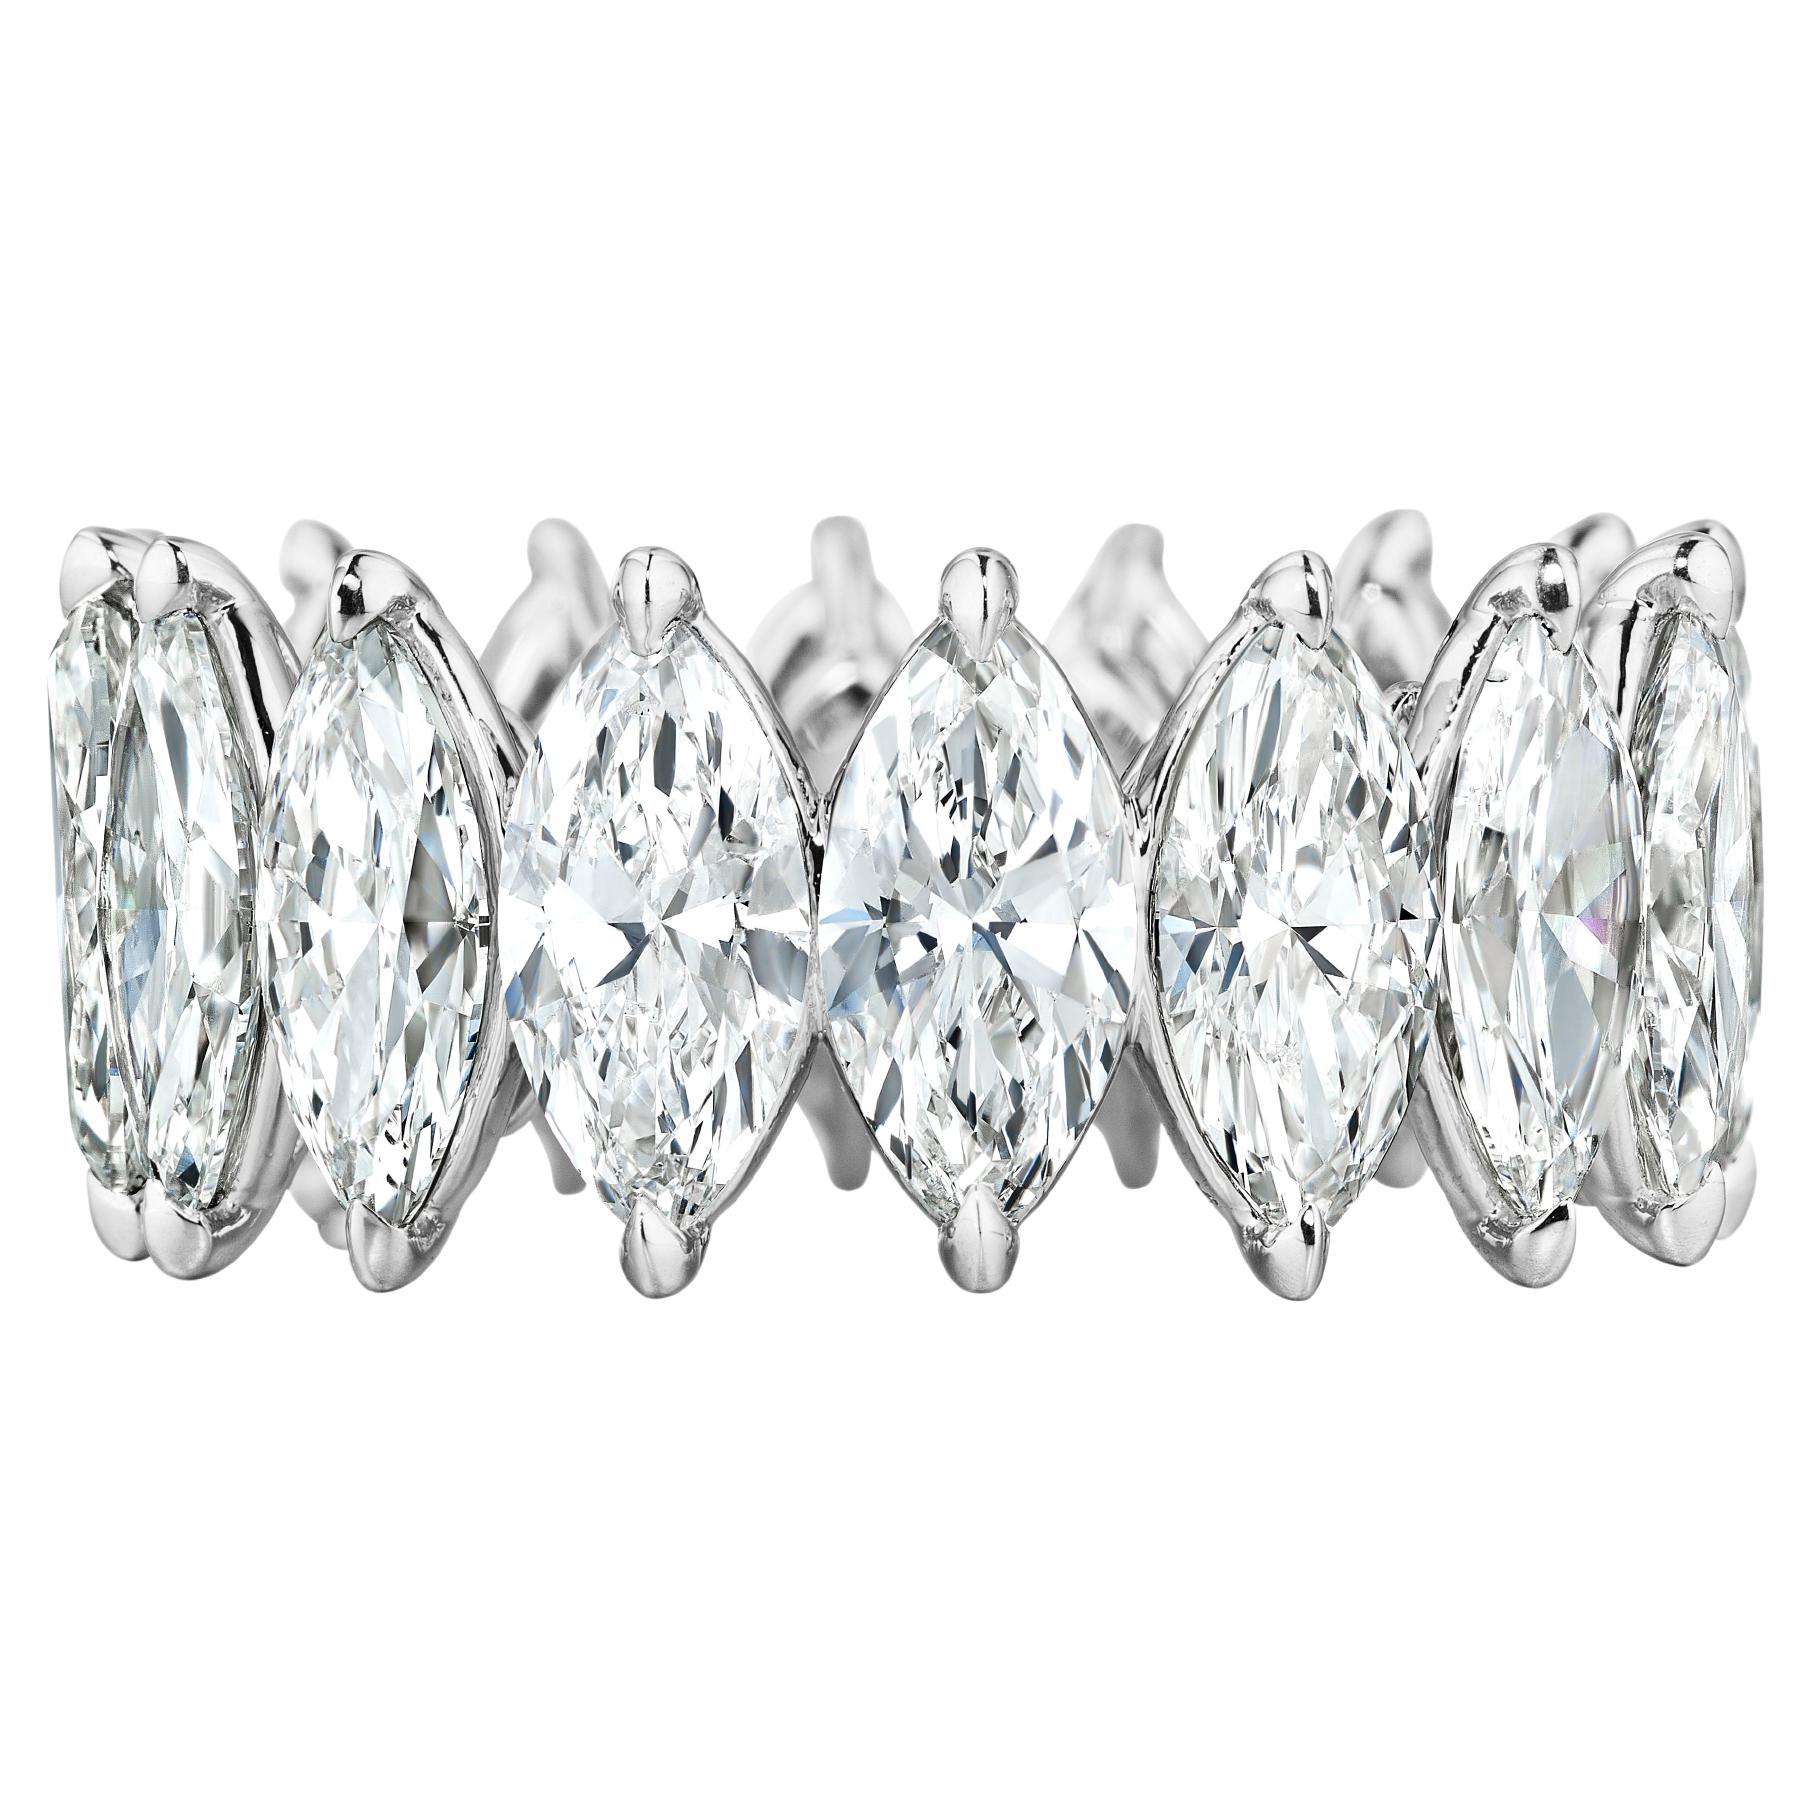 16 Perfectly matched and elongated Marquise Cut Diamonds weighing a total of 8.02 Carats.
Each stone weighs between 0.50ct+
Stones are DE color and SI Clarity.
Every stone is certified by GIA.
Set in Platinum.
Size 6.